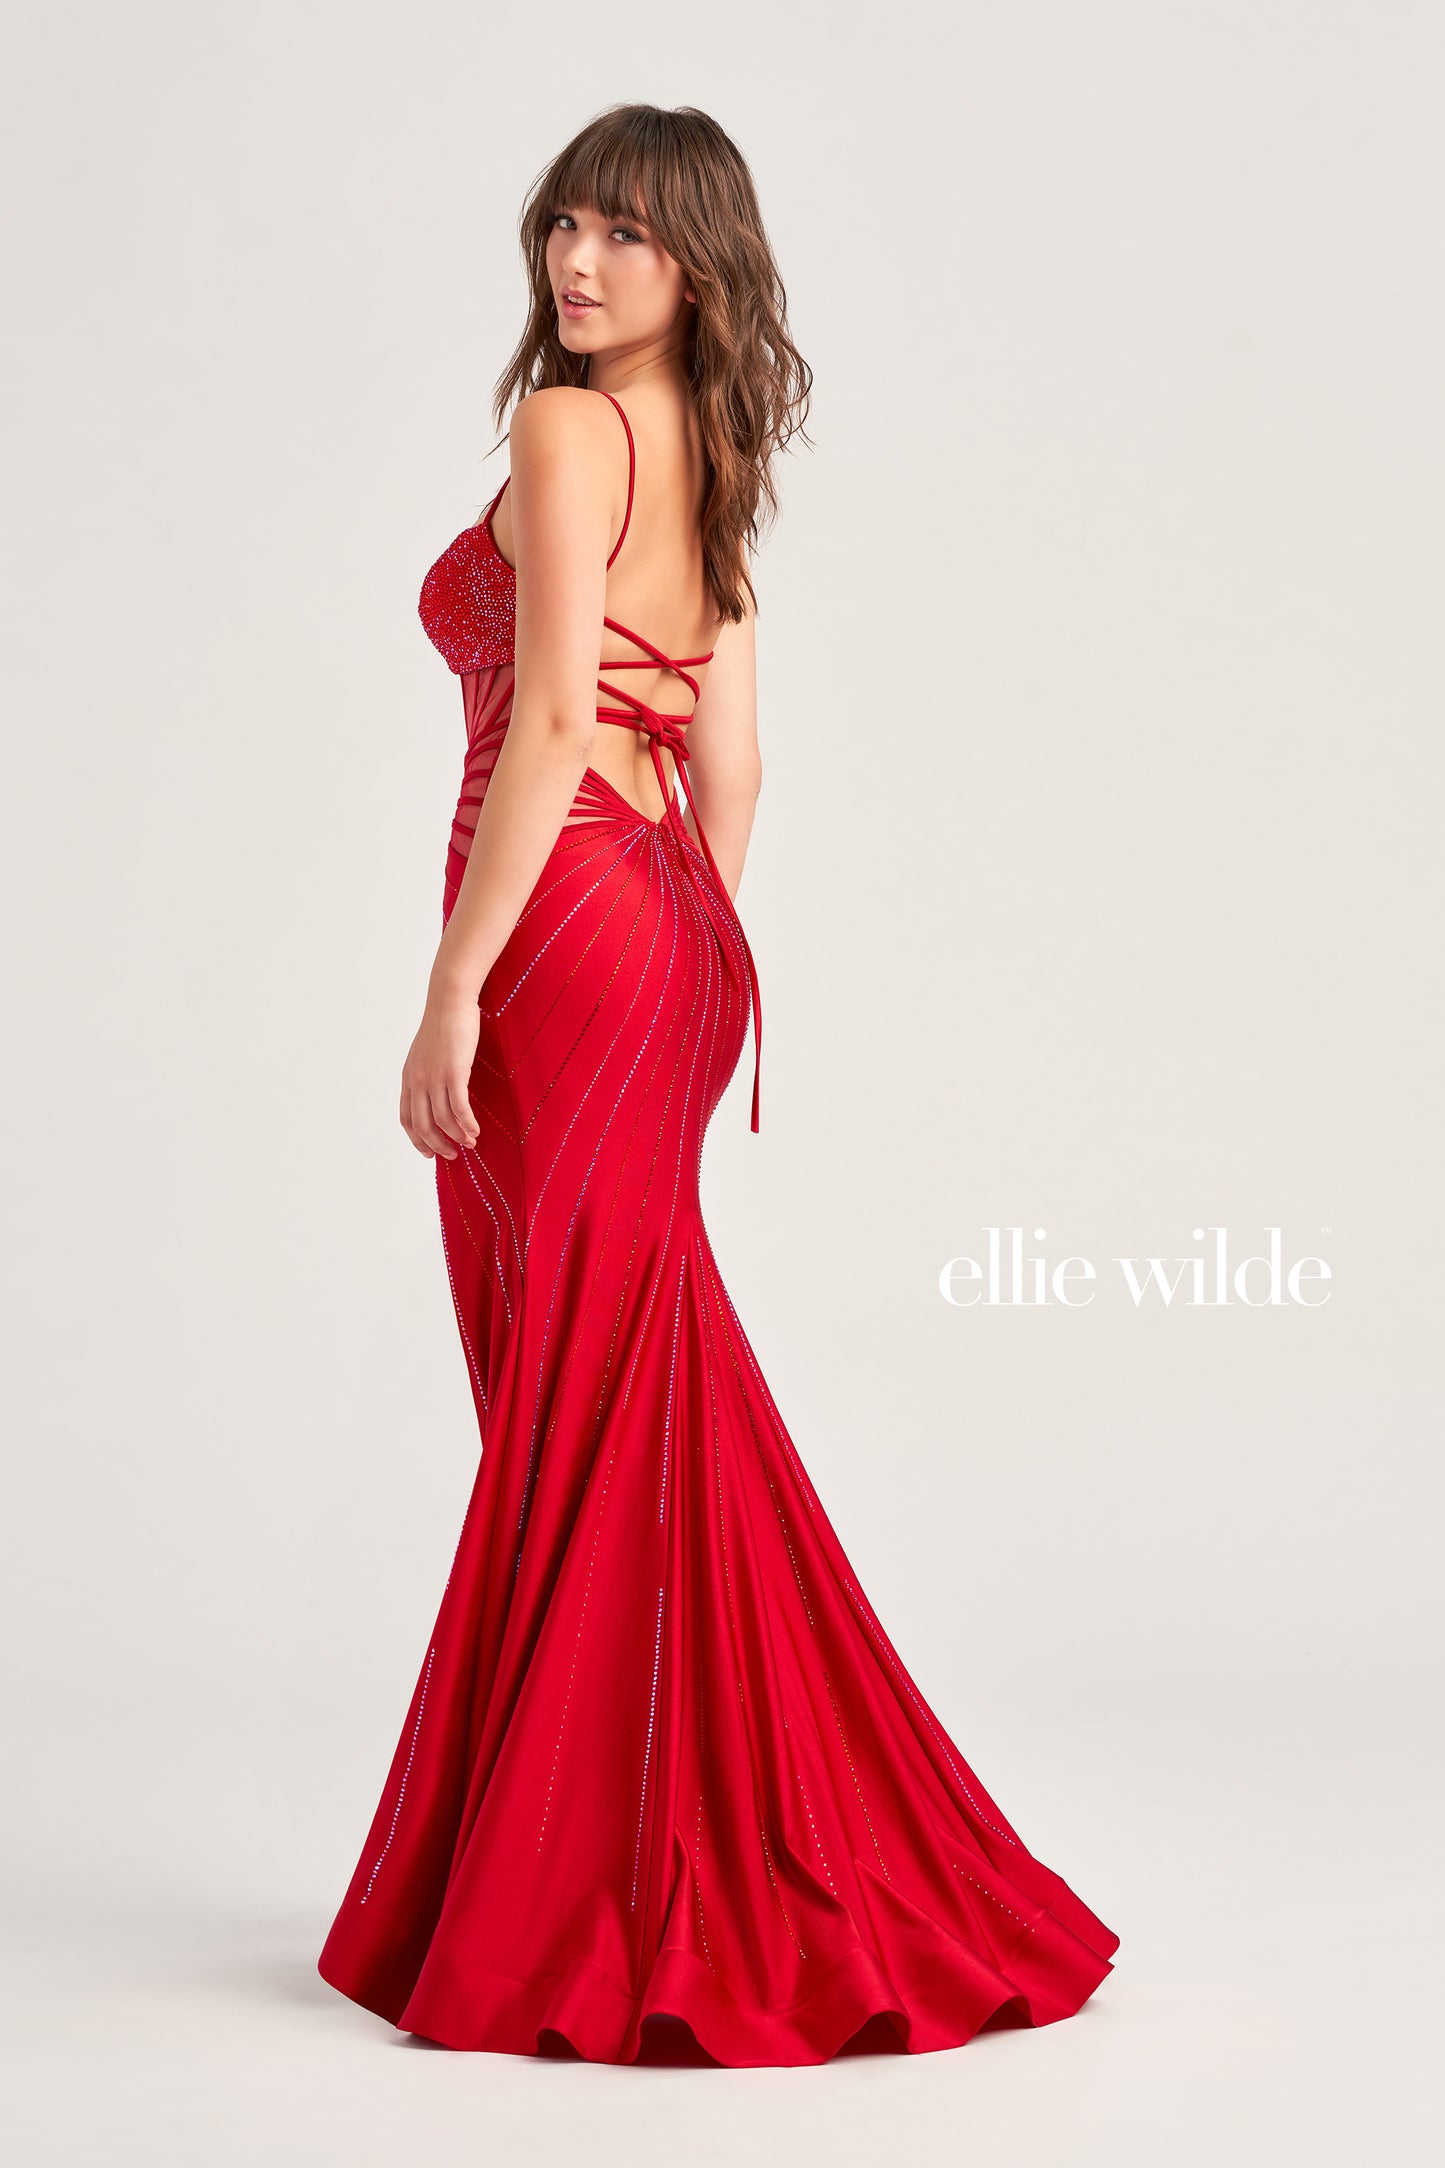 The Ellie Wilde EW35026 Prom Dress is an exquisite choice for any formal occasion. Crafted from jersey fabric with shining stone accents, it features a sweetheart neckline, fit and flare silhouette, and corset sheer bodice. A high slit and lace-up low back complete the look. Perfect for any memorable night.  COLOR: BLACK, ROYAL BLUE, HOT PINK, RUBY SIZE: 00 - 16